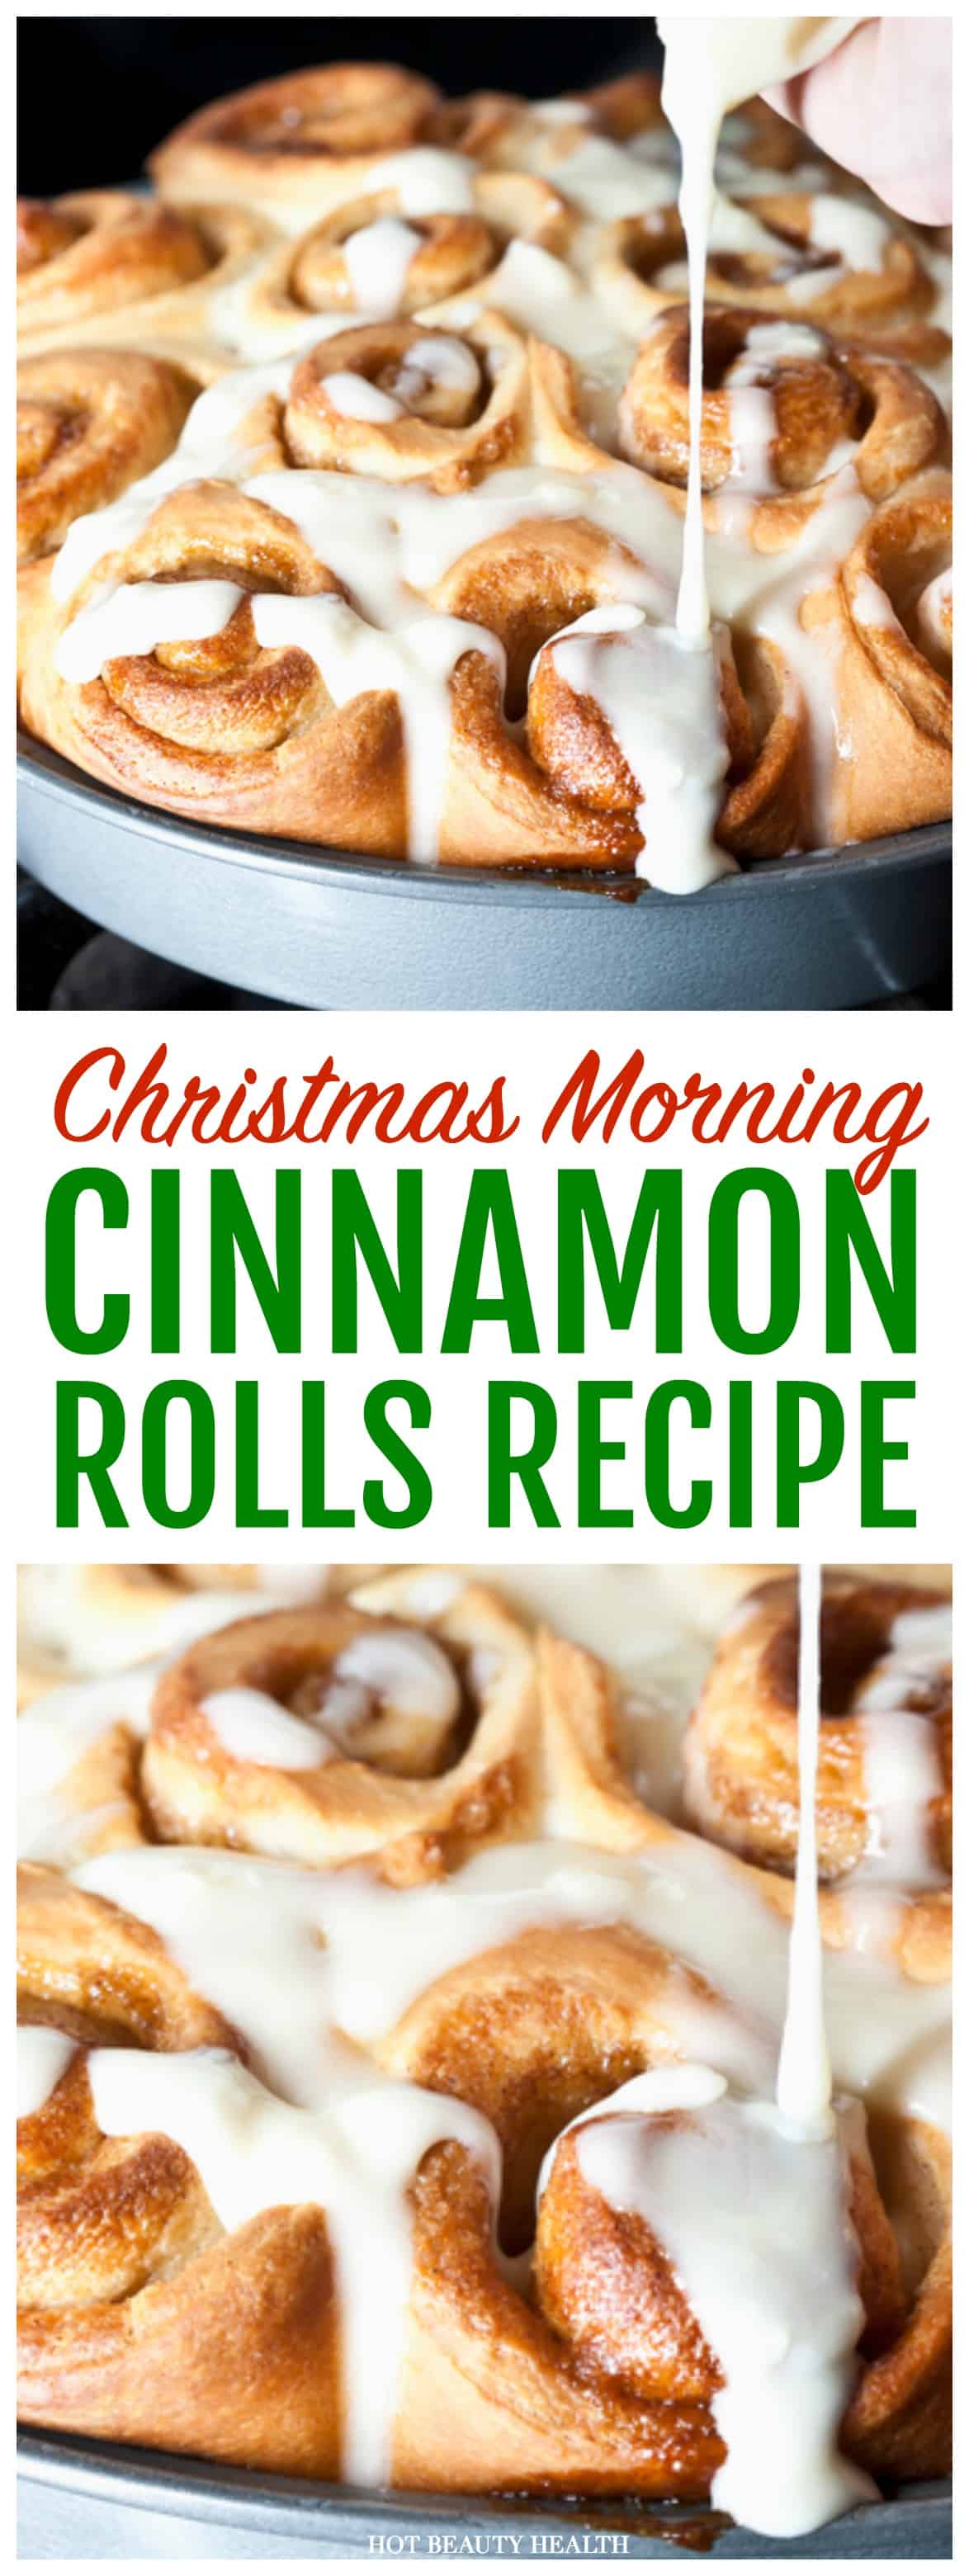 Looking for Thanksgiving or Christmas morning recipe ideas? These cinnamon rolls with cream cheese icing are hands down so sticky, gooey, buttery, and deliciously sweet. They’re simply the best (better than Cinnabon) and will help make the holidays even more magical for your guests. Click here for the easy to follow recipe.